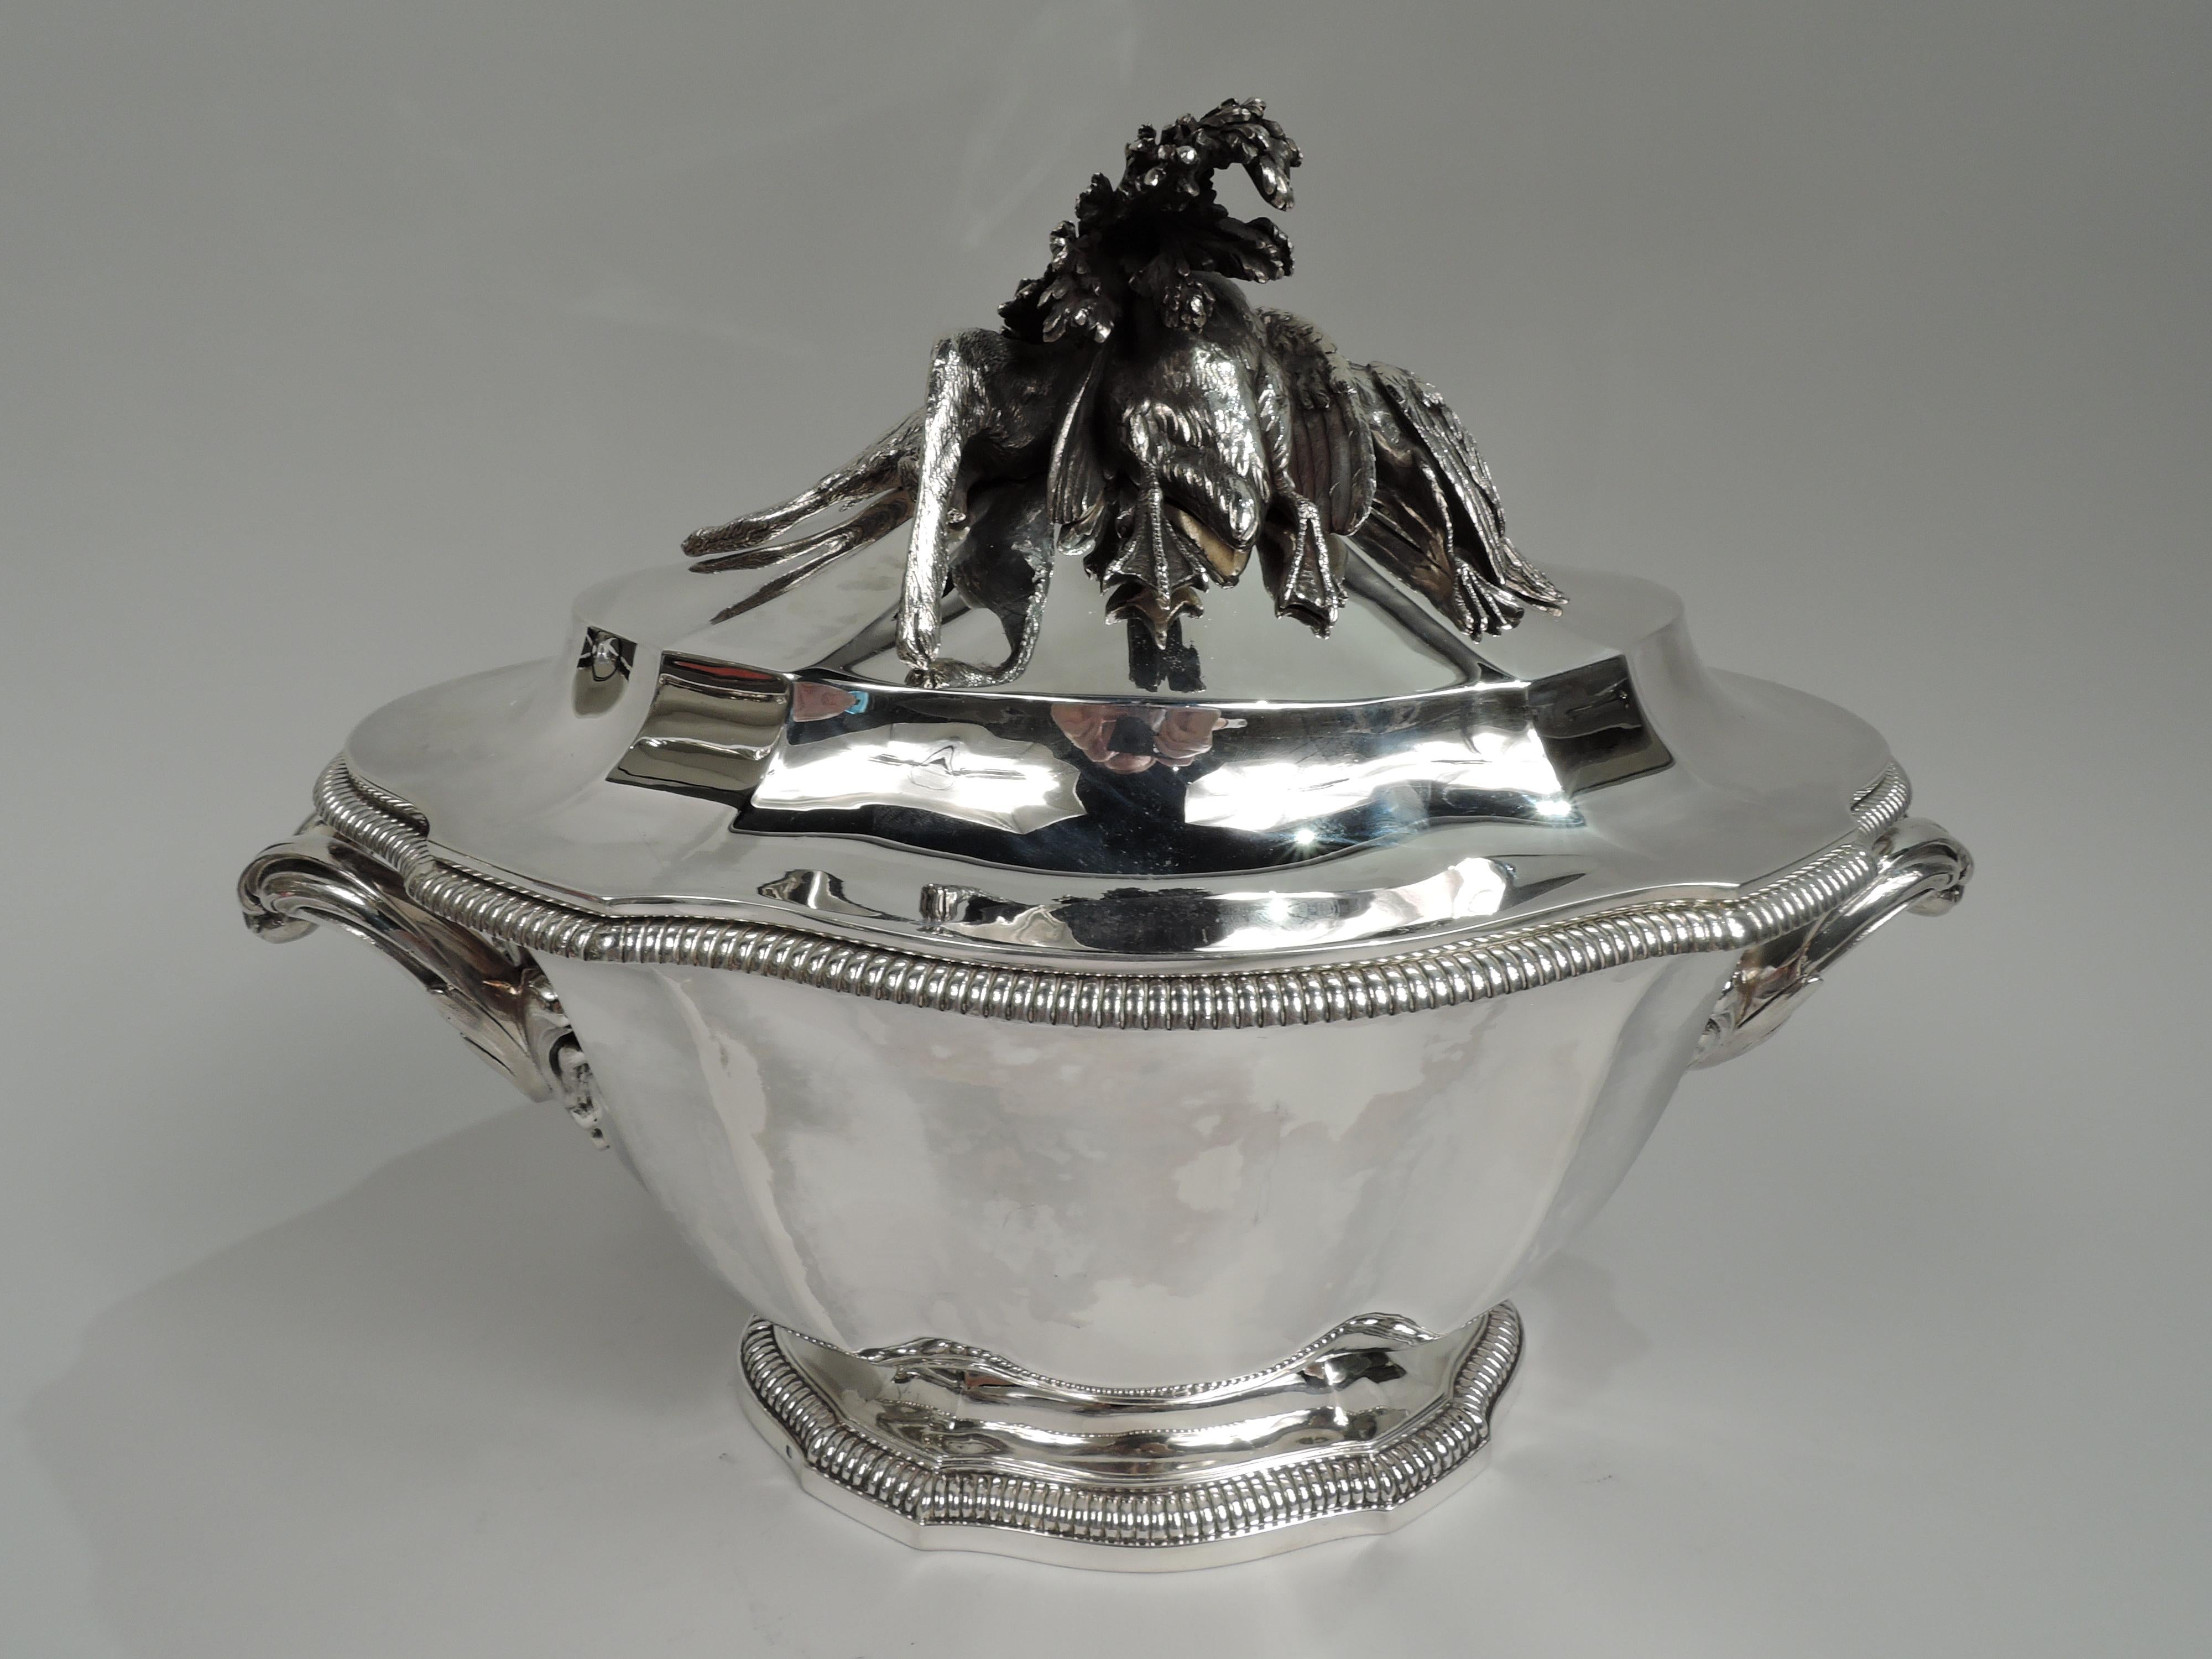 French Belle Epoque 950 silver tureen, ca 1910. Tapering oval curvilinear bowl on same raised foot with gadrooned rims. Leaf-mounted double c-scroll end handles. Raised cover. Restrained turn-of-the-century Classicism enlivened with a cast still